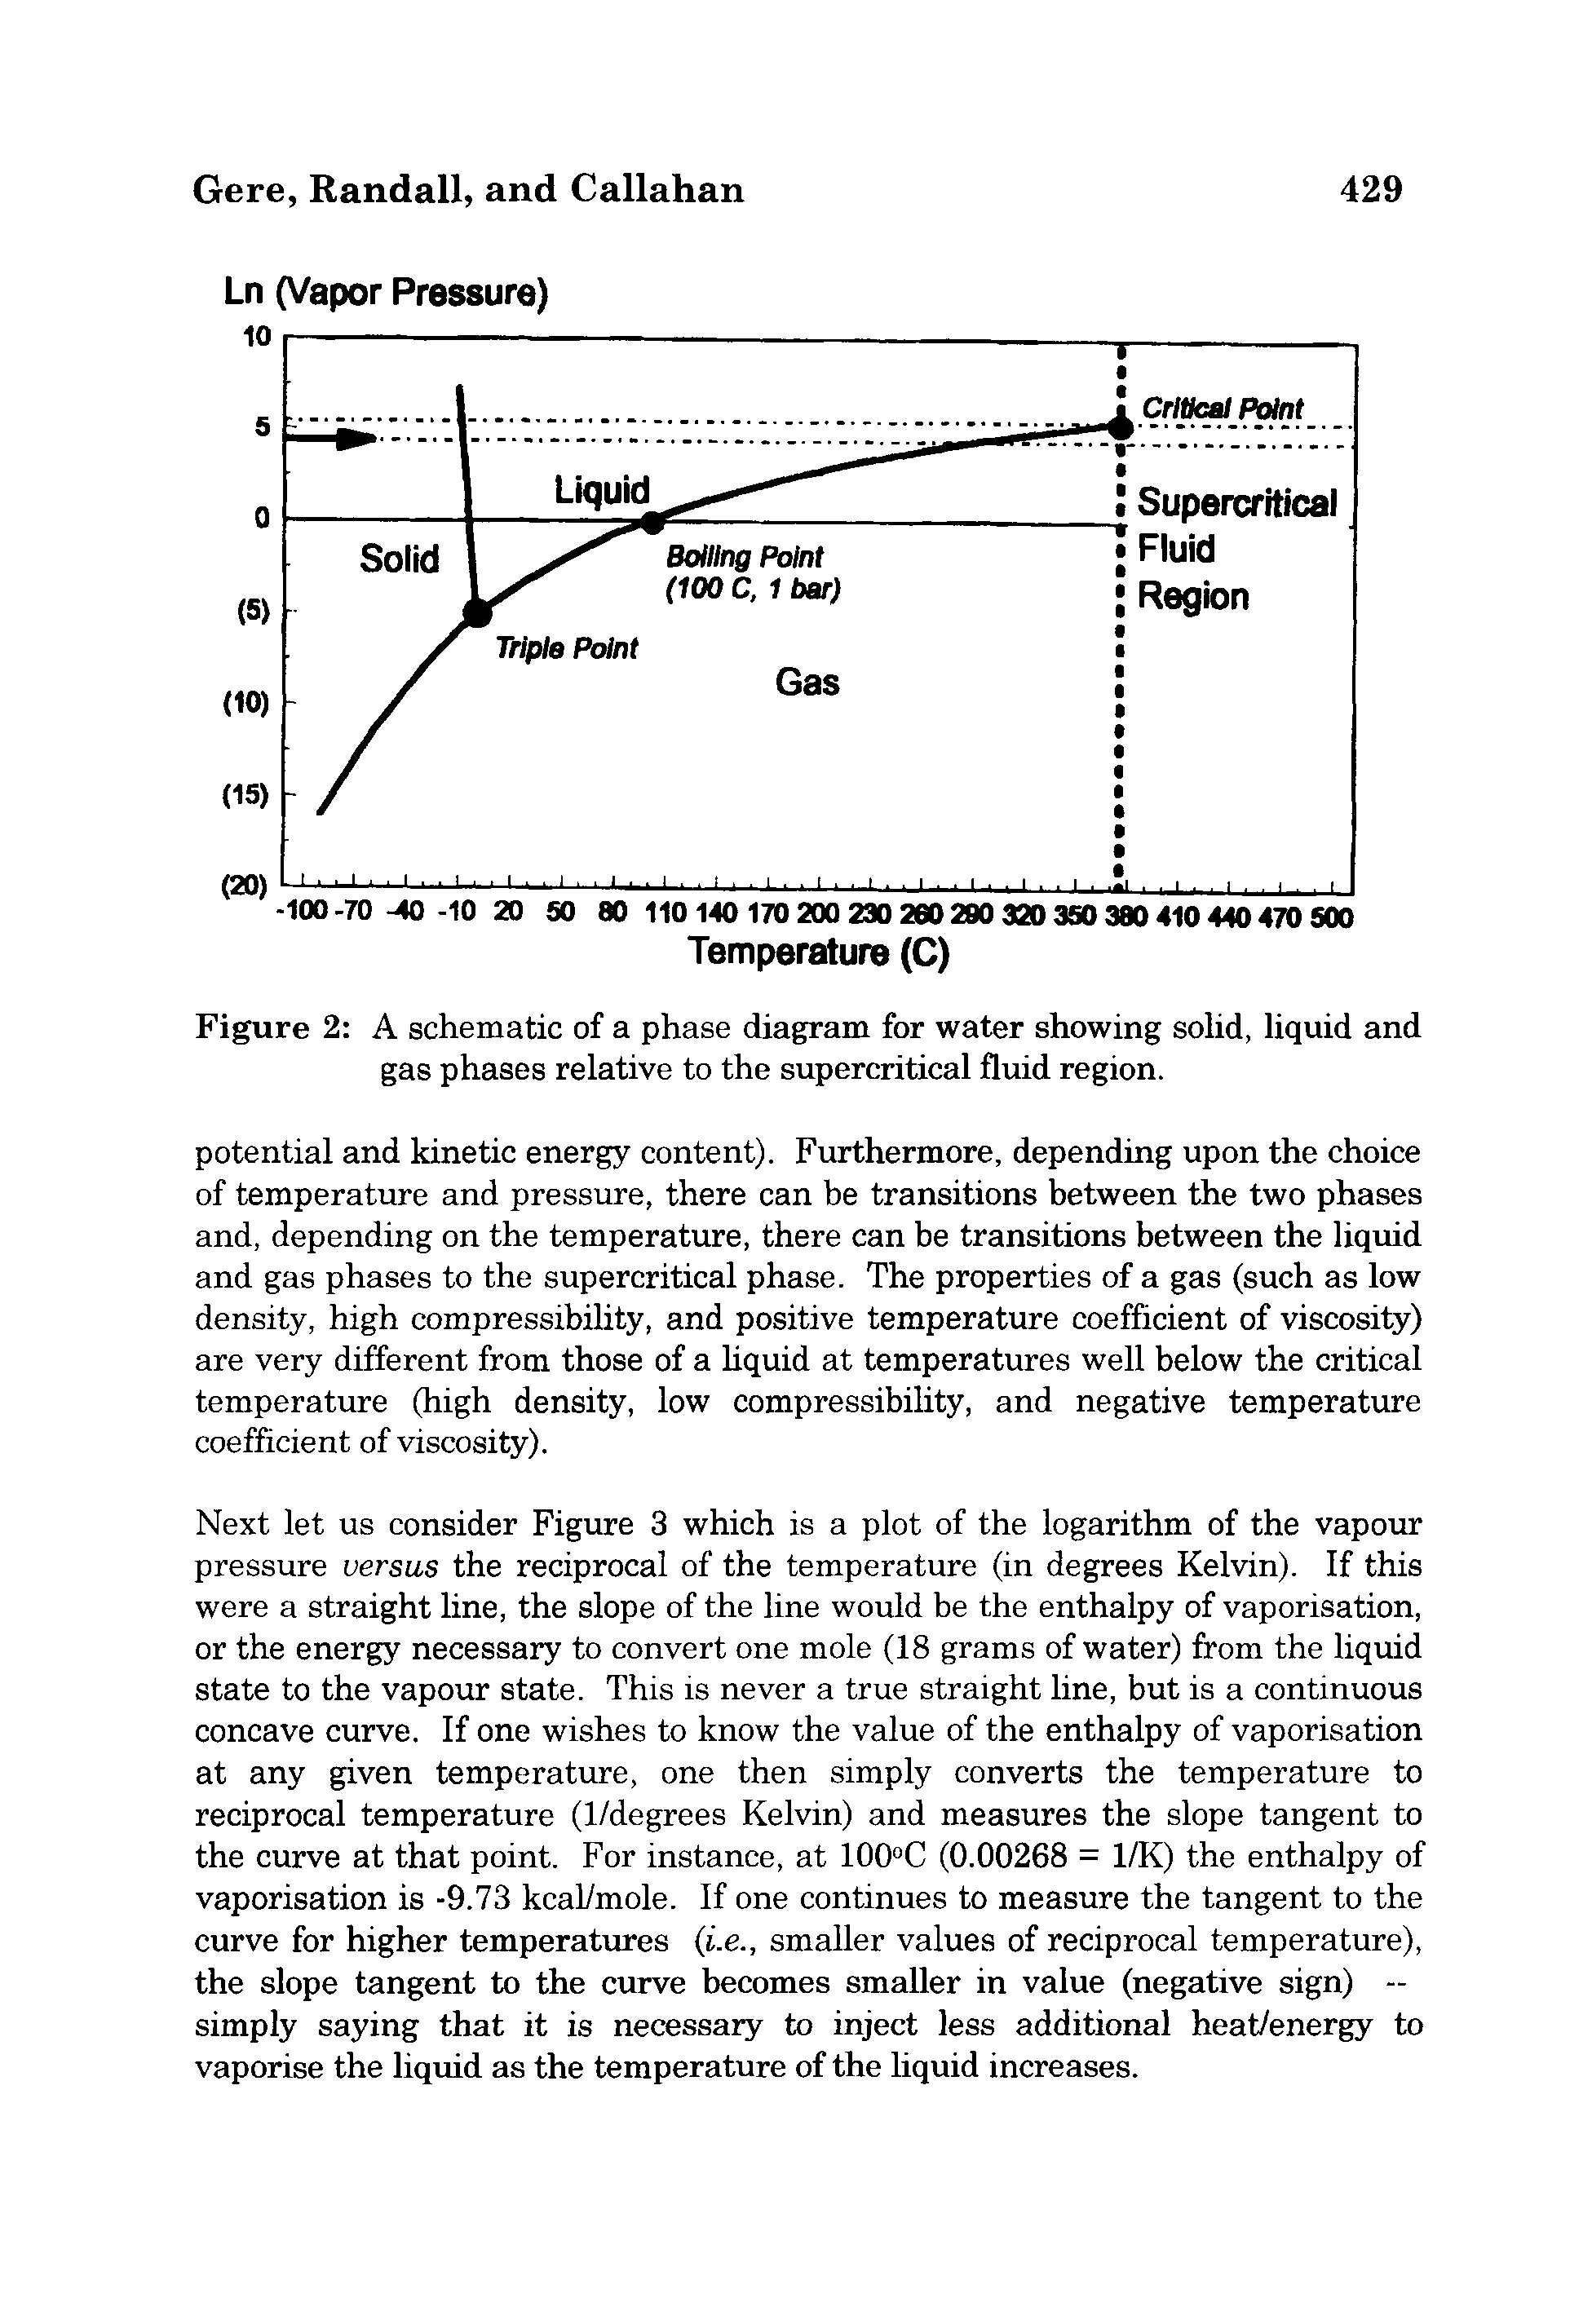 Figure 2 A schematic of a phase diagram for water showing solid, liquid and gas phases relative to the supercritical fluid region.